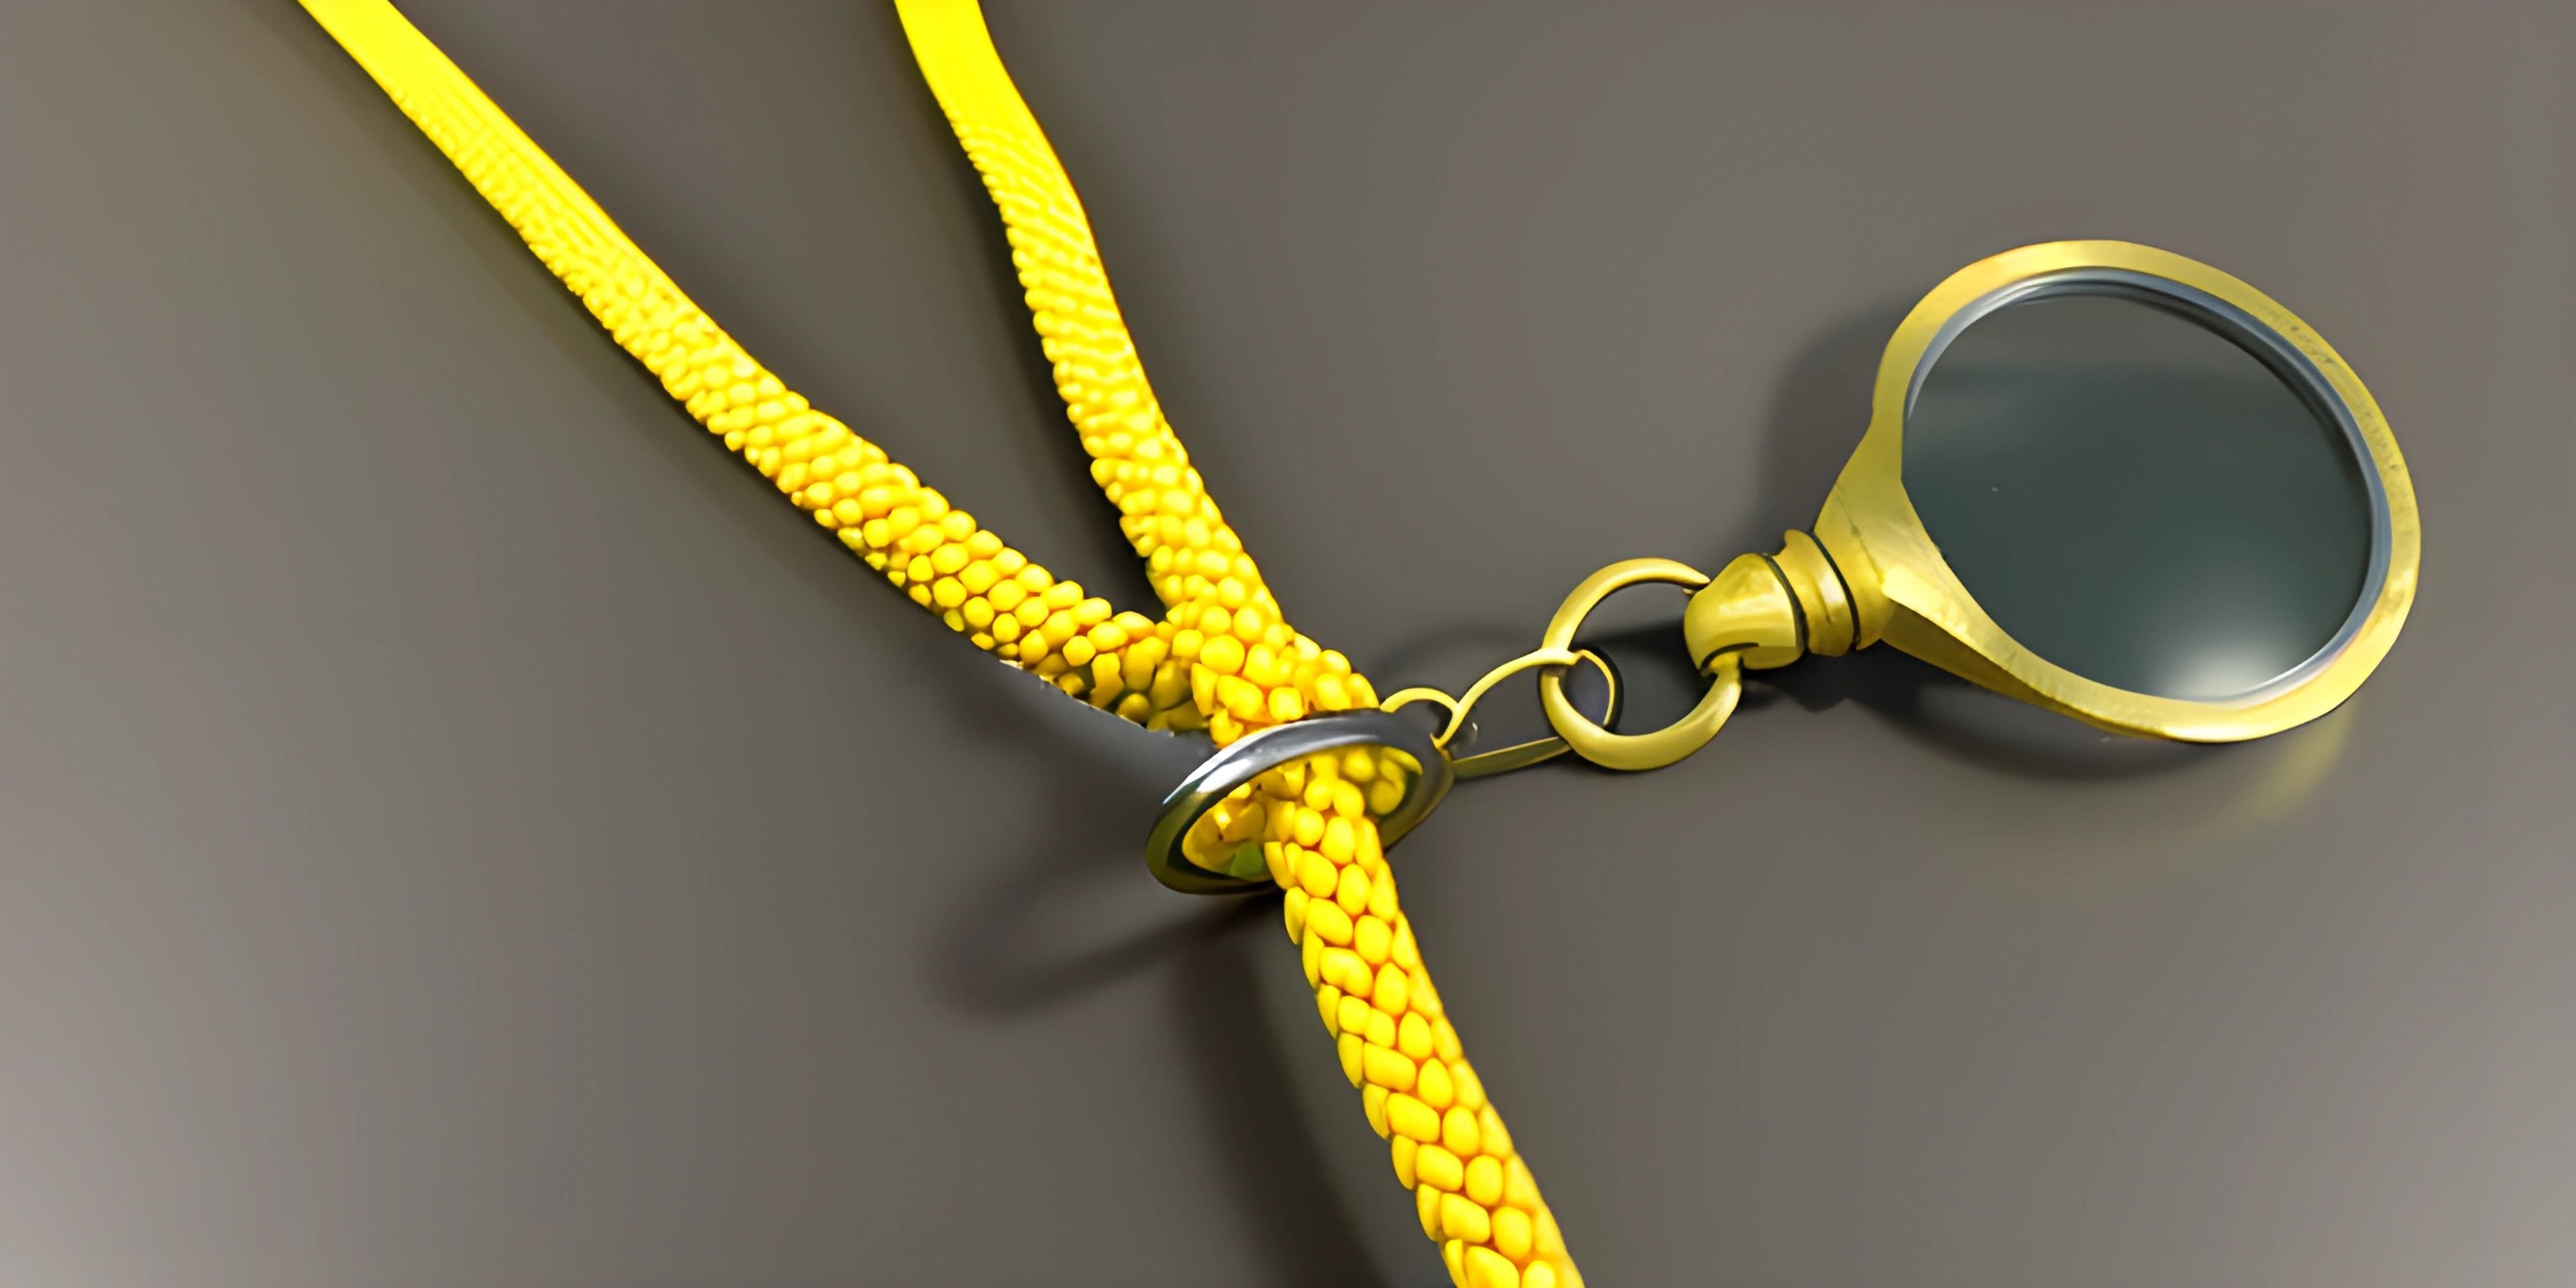 a round brass colored metal zipper that has been tied in to the handle of a yellow plastic bag